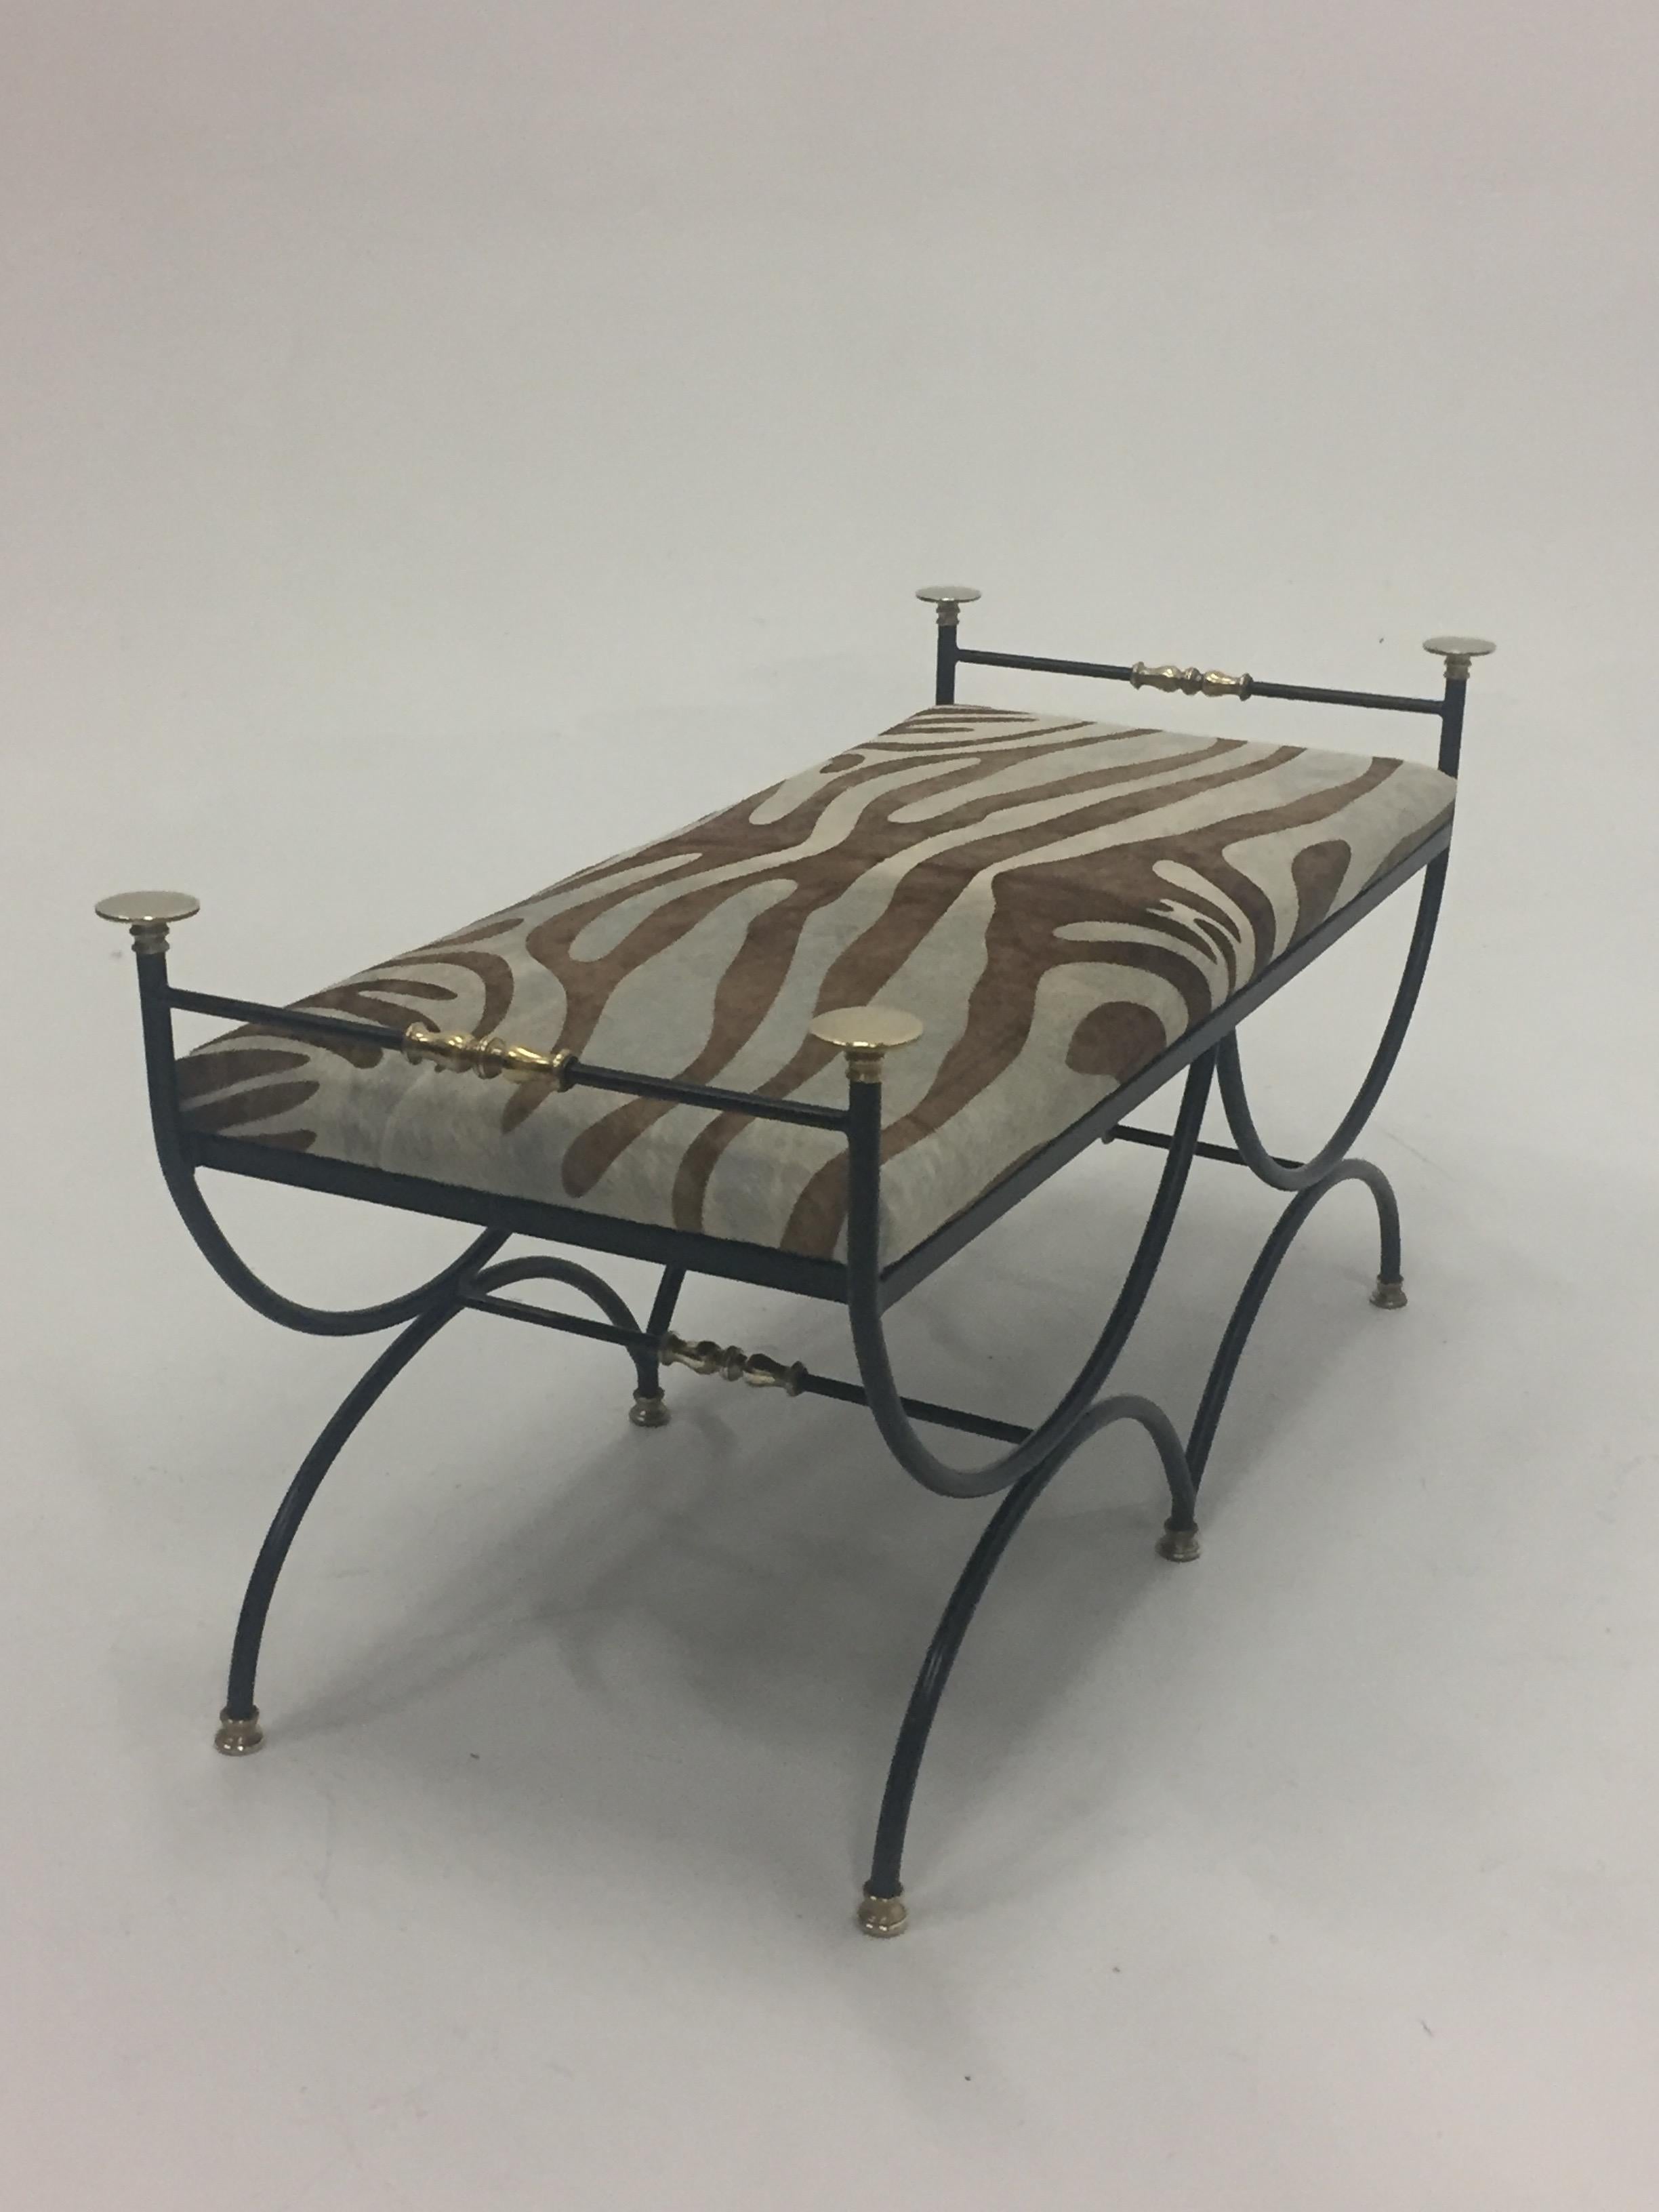 Handsome vintage rectangular bench having hand forged black wrought iron base with
brass finials and details, newly upholstered in zebra print cowhide.